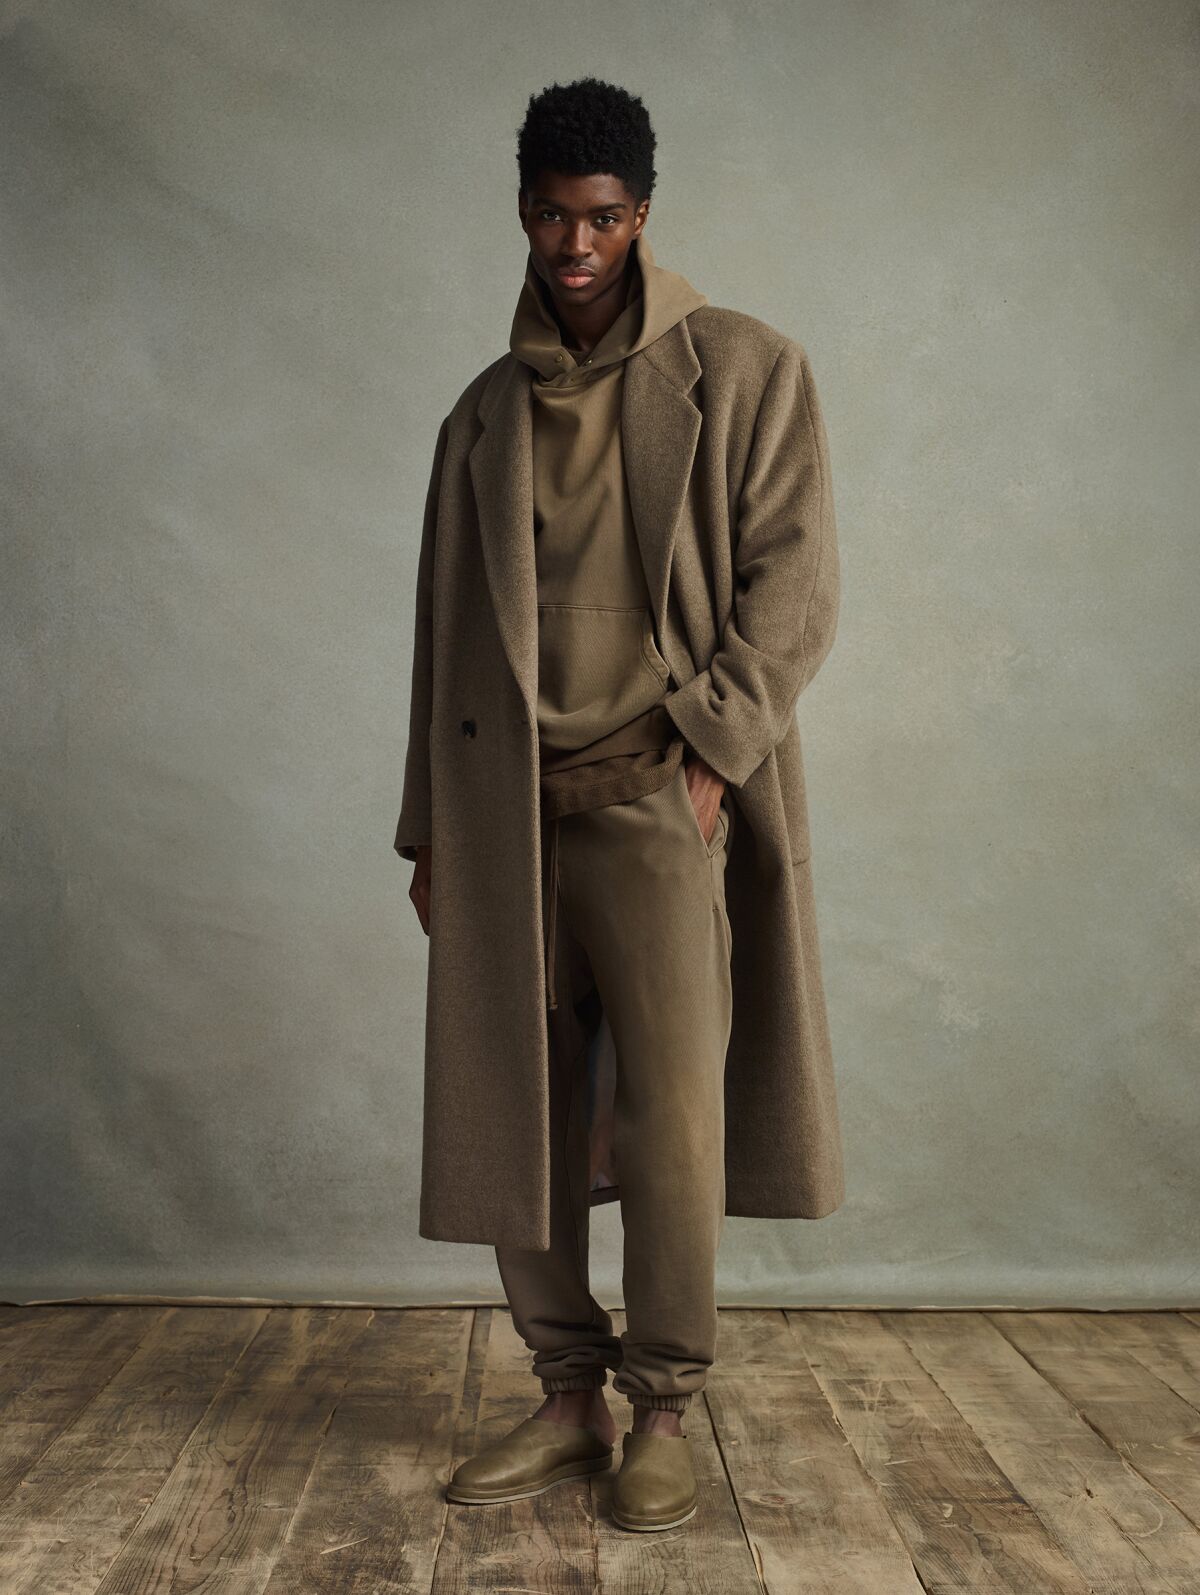 A model in sophisticated outerwear and footwear from Fear of God's seventh collection.